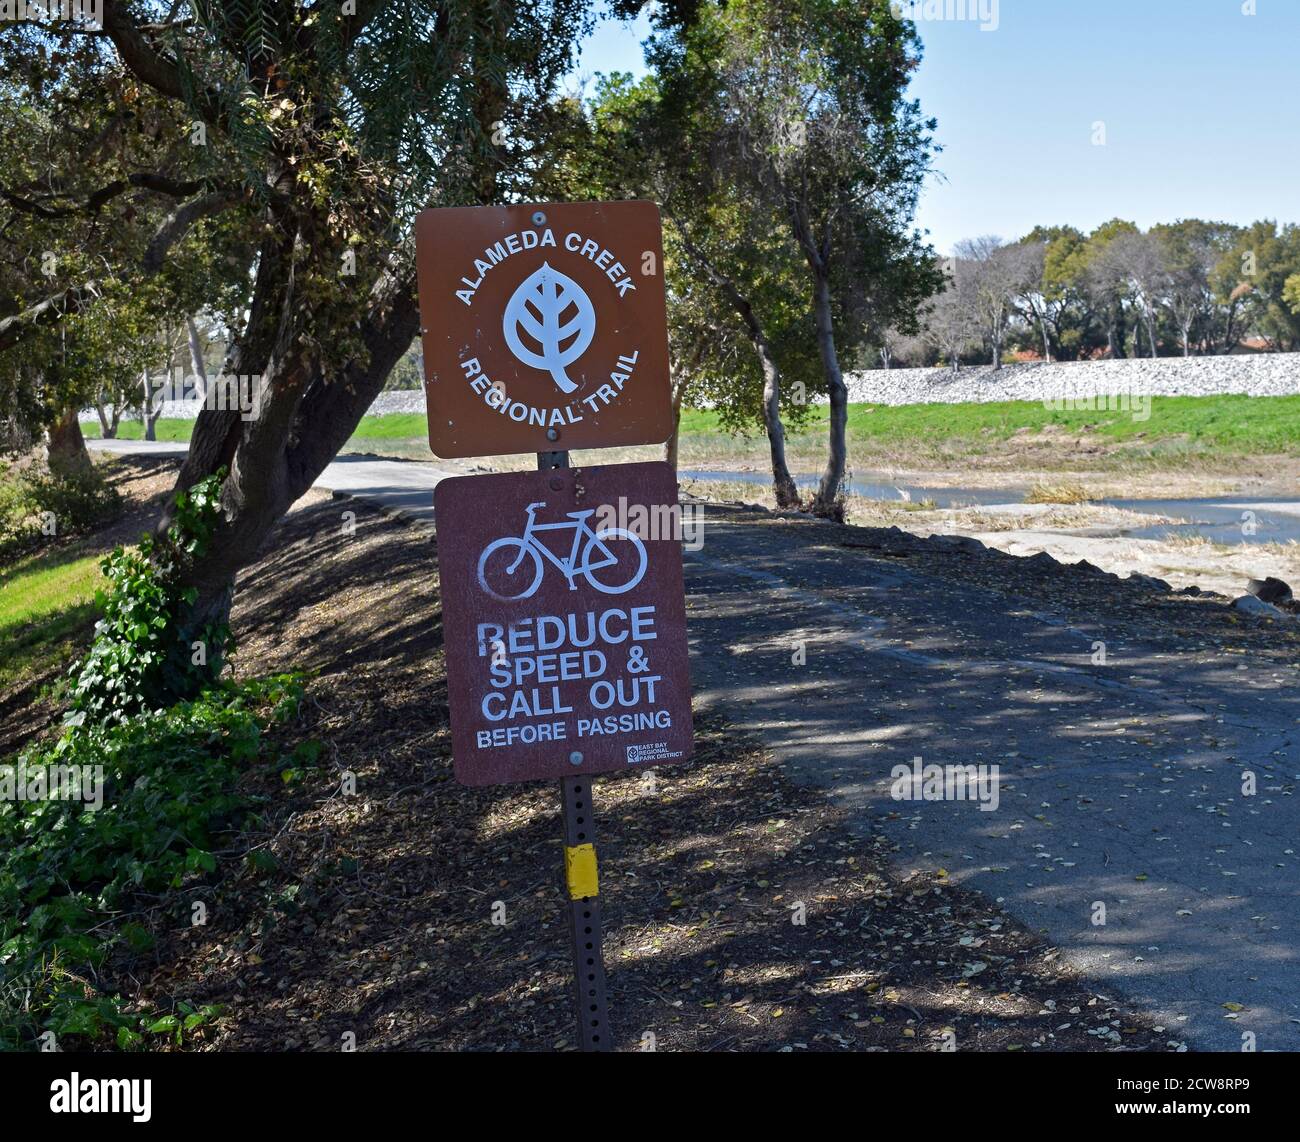 Alameda Creek Trail, bicycles reduce speed call out before passing, sign, East Bay Regional Trail, California Stock Photo